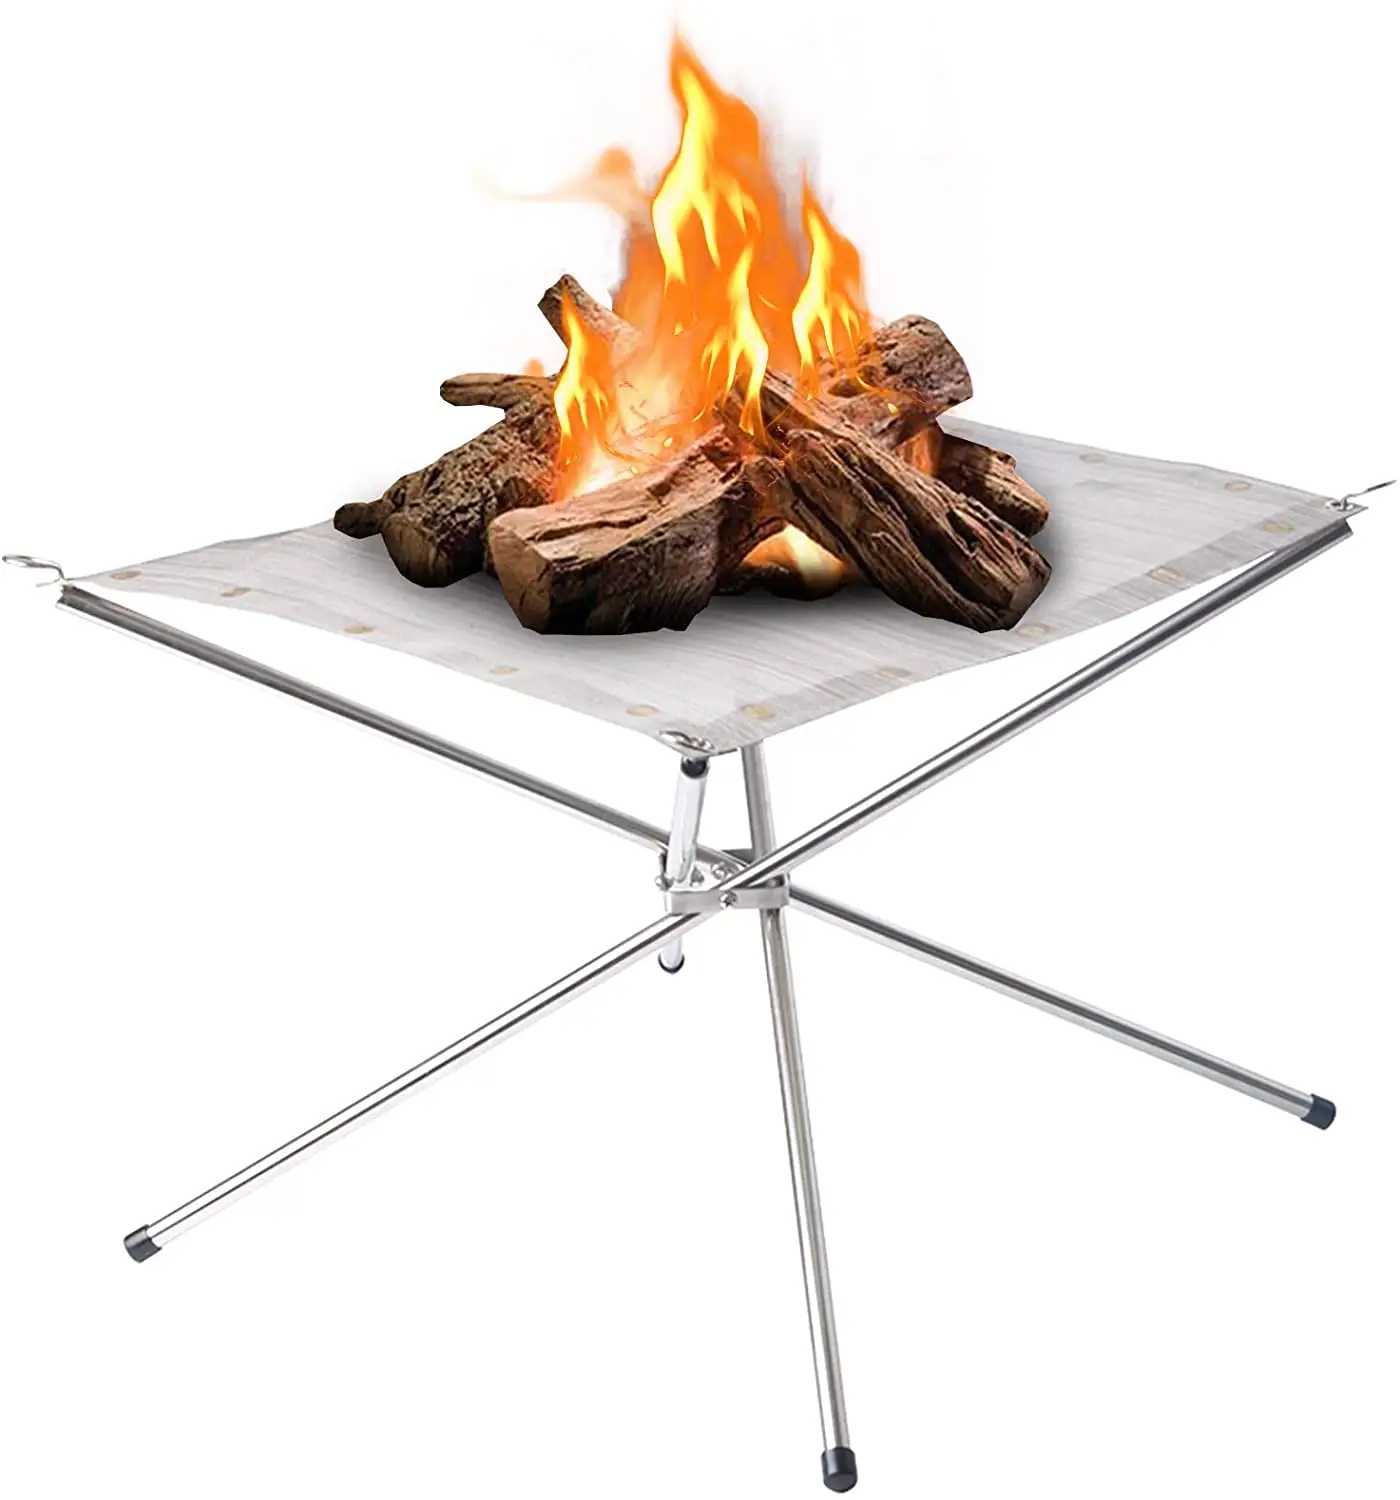 Outdoor Bonfire Stand Mesh Sheet Stainless Steel Portable Folding Fire Pit